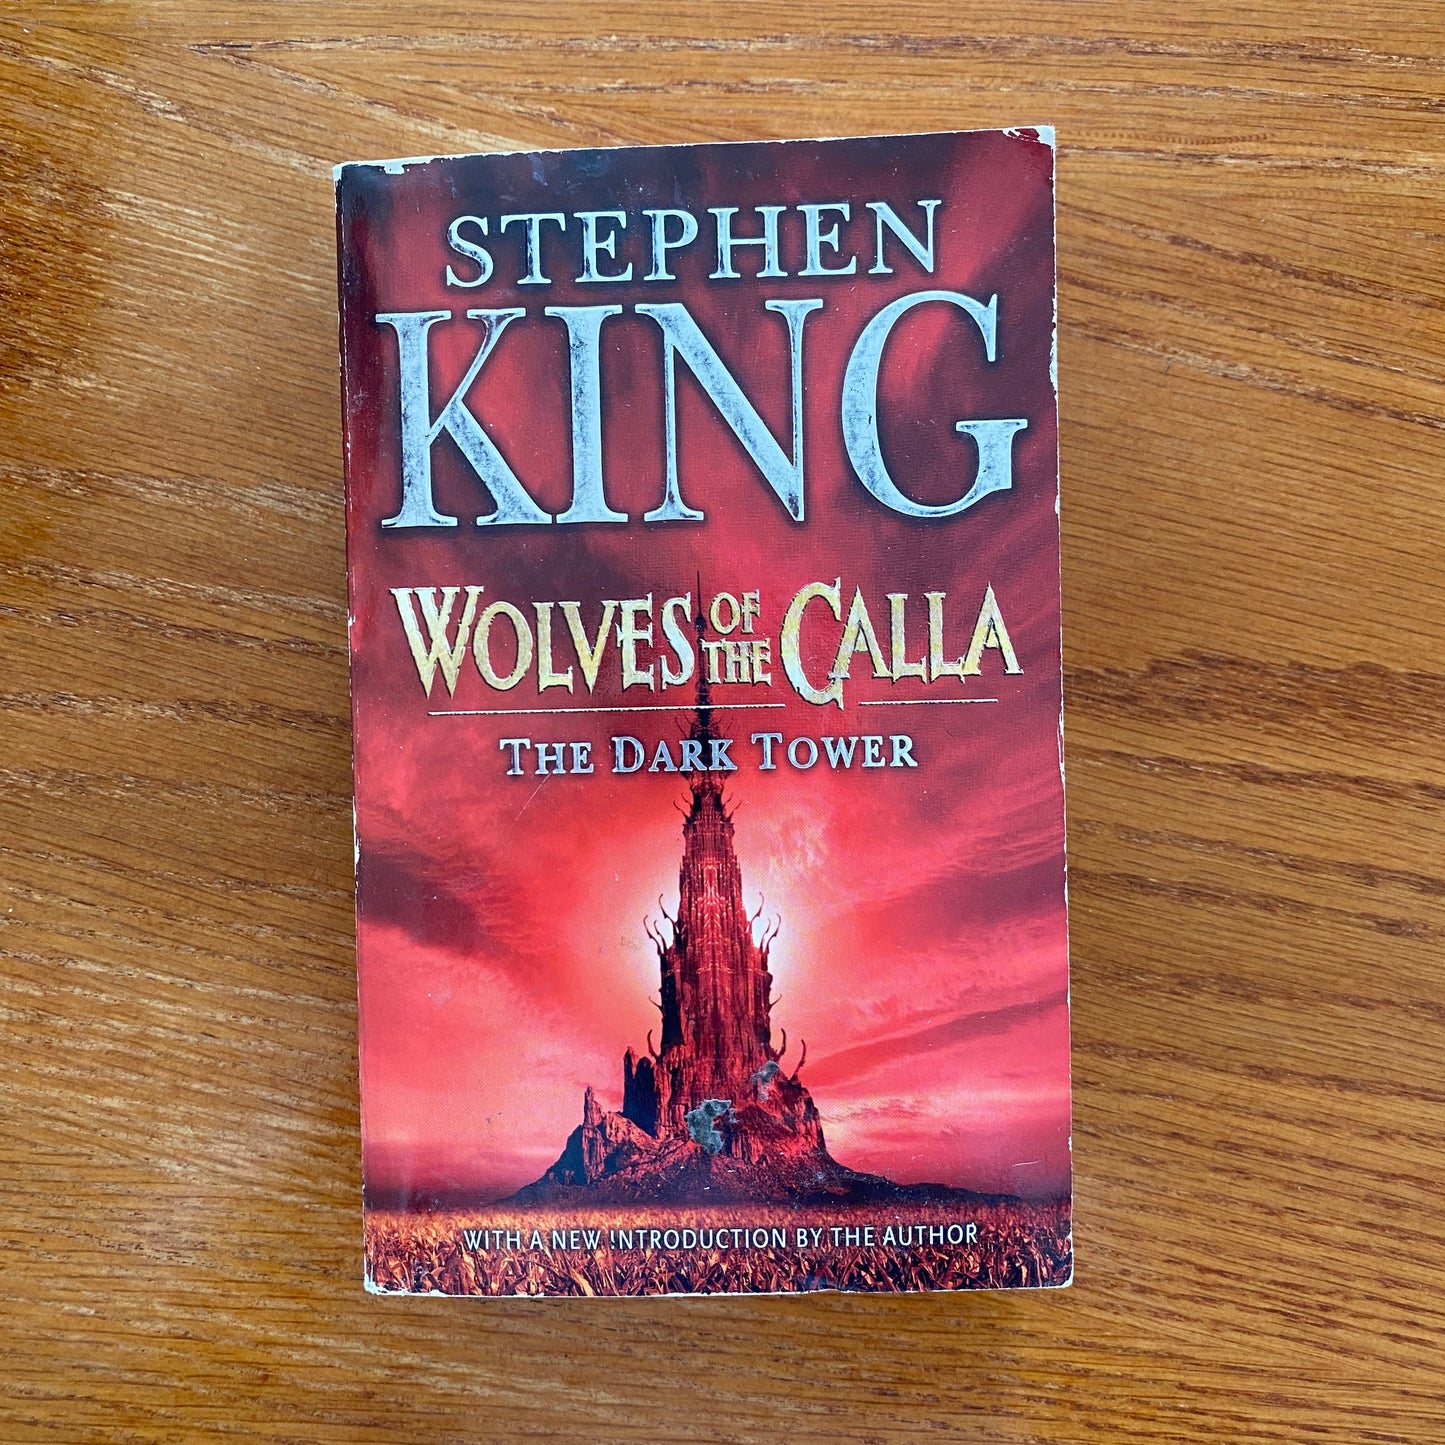 The Dark Tower: Wolves of Calla - Stephen King